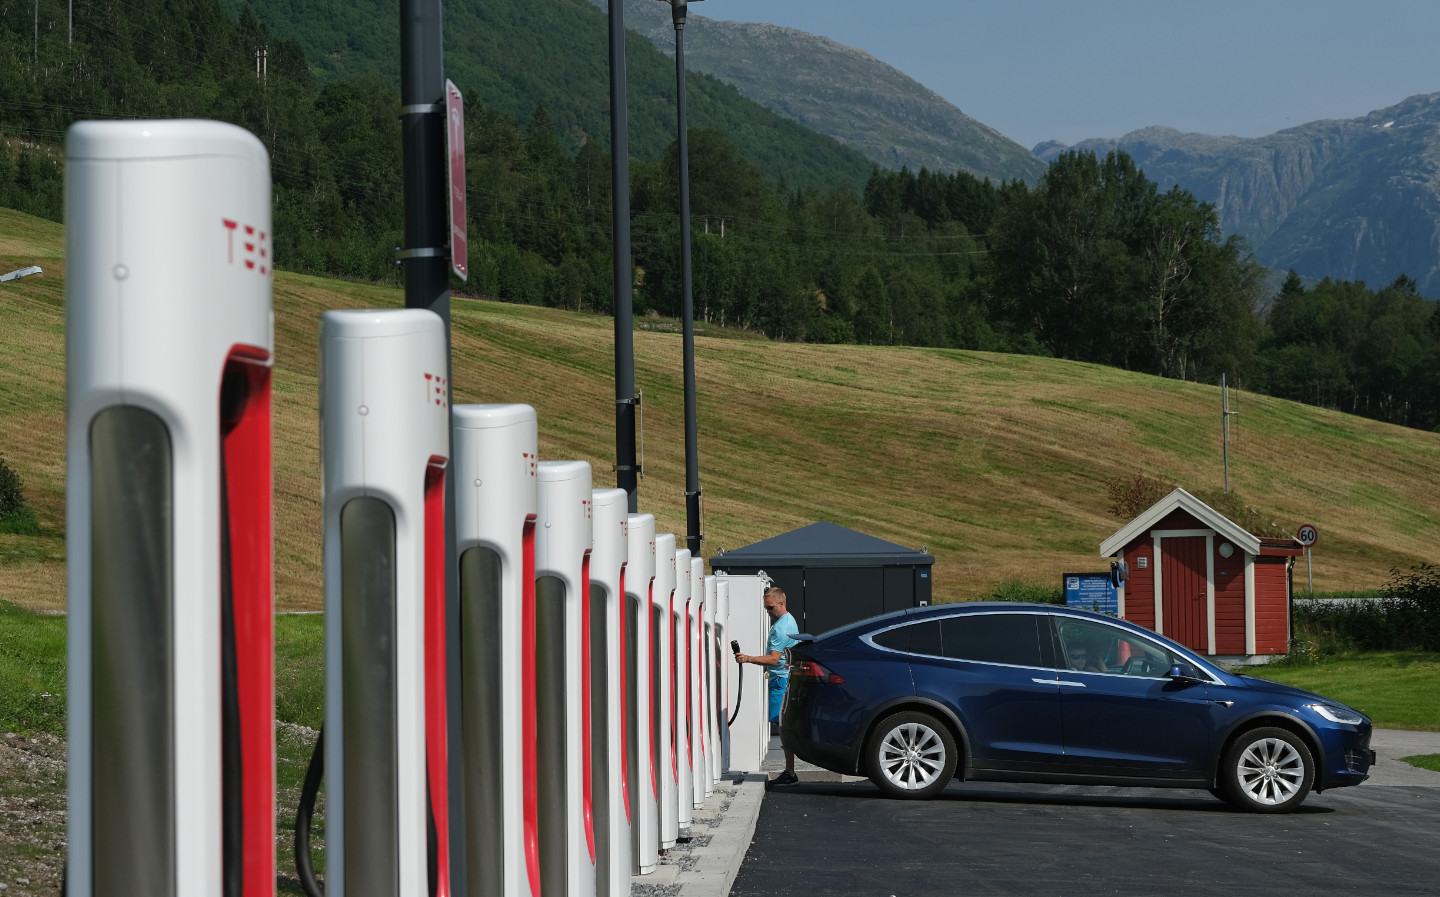 More than half of new cars sold in Norway are EVs